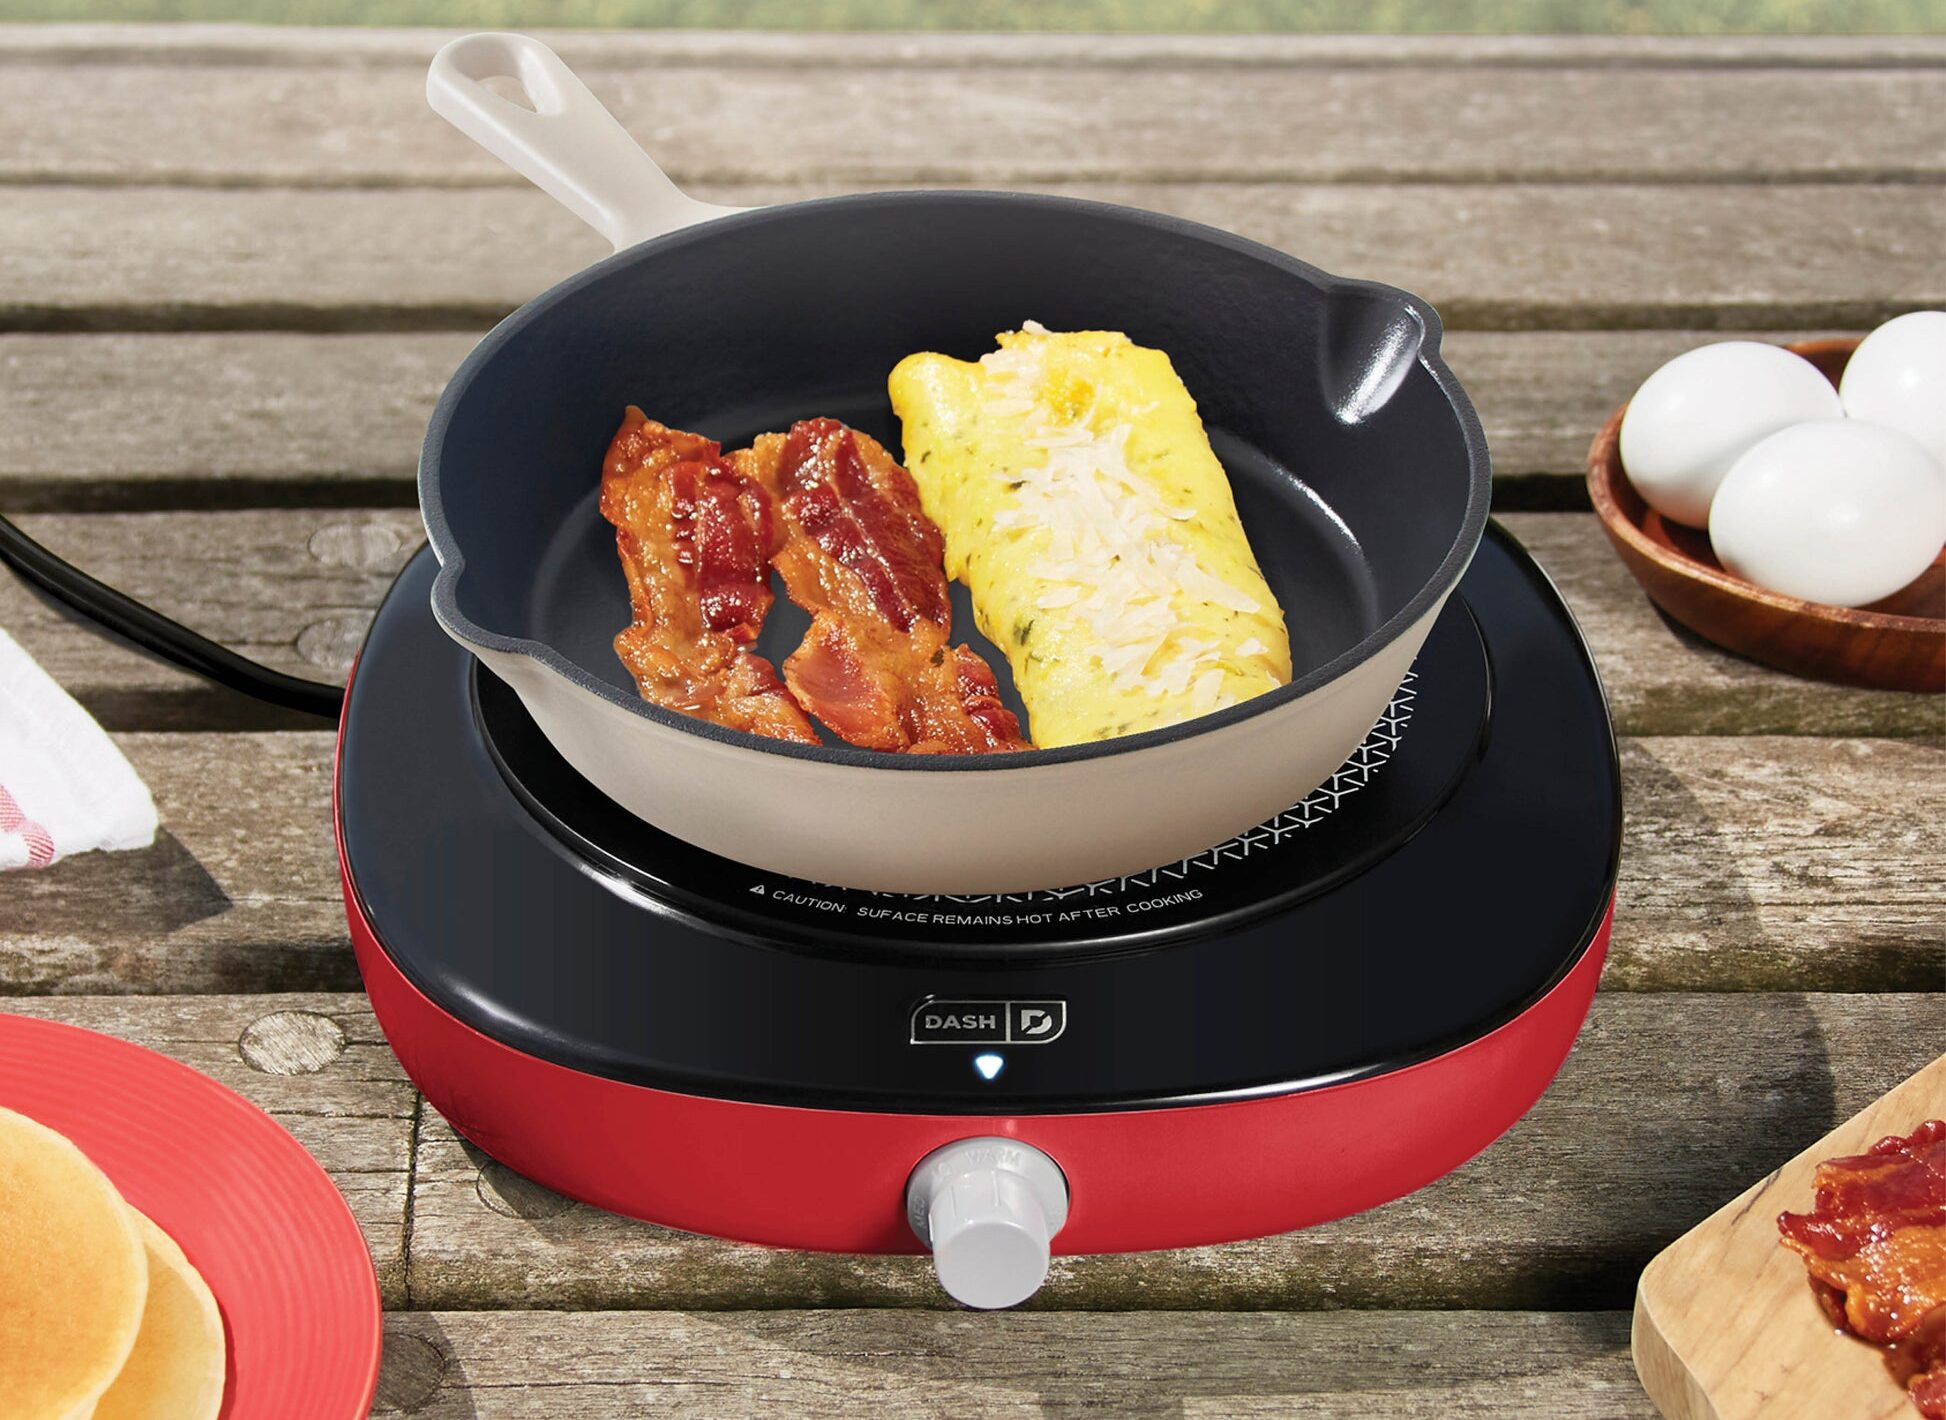 The DASH Electric Cooker: Infrared Technology for Perfectly Cooked Meals.